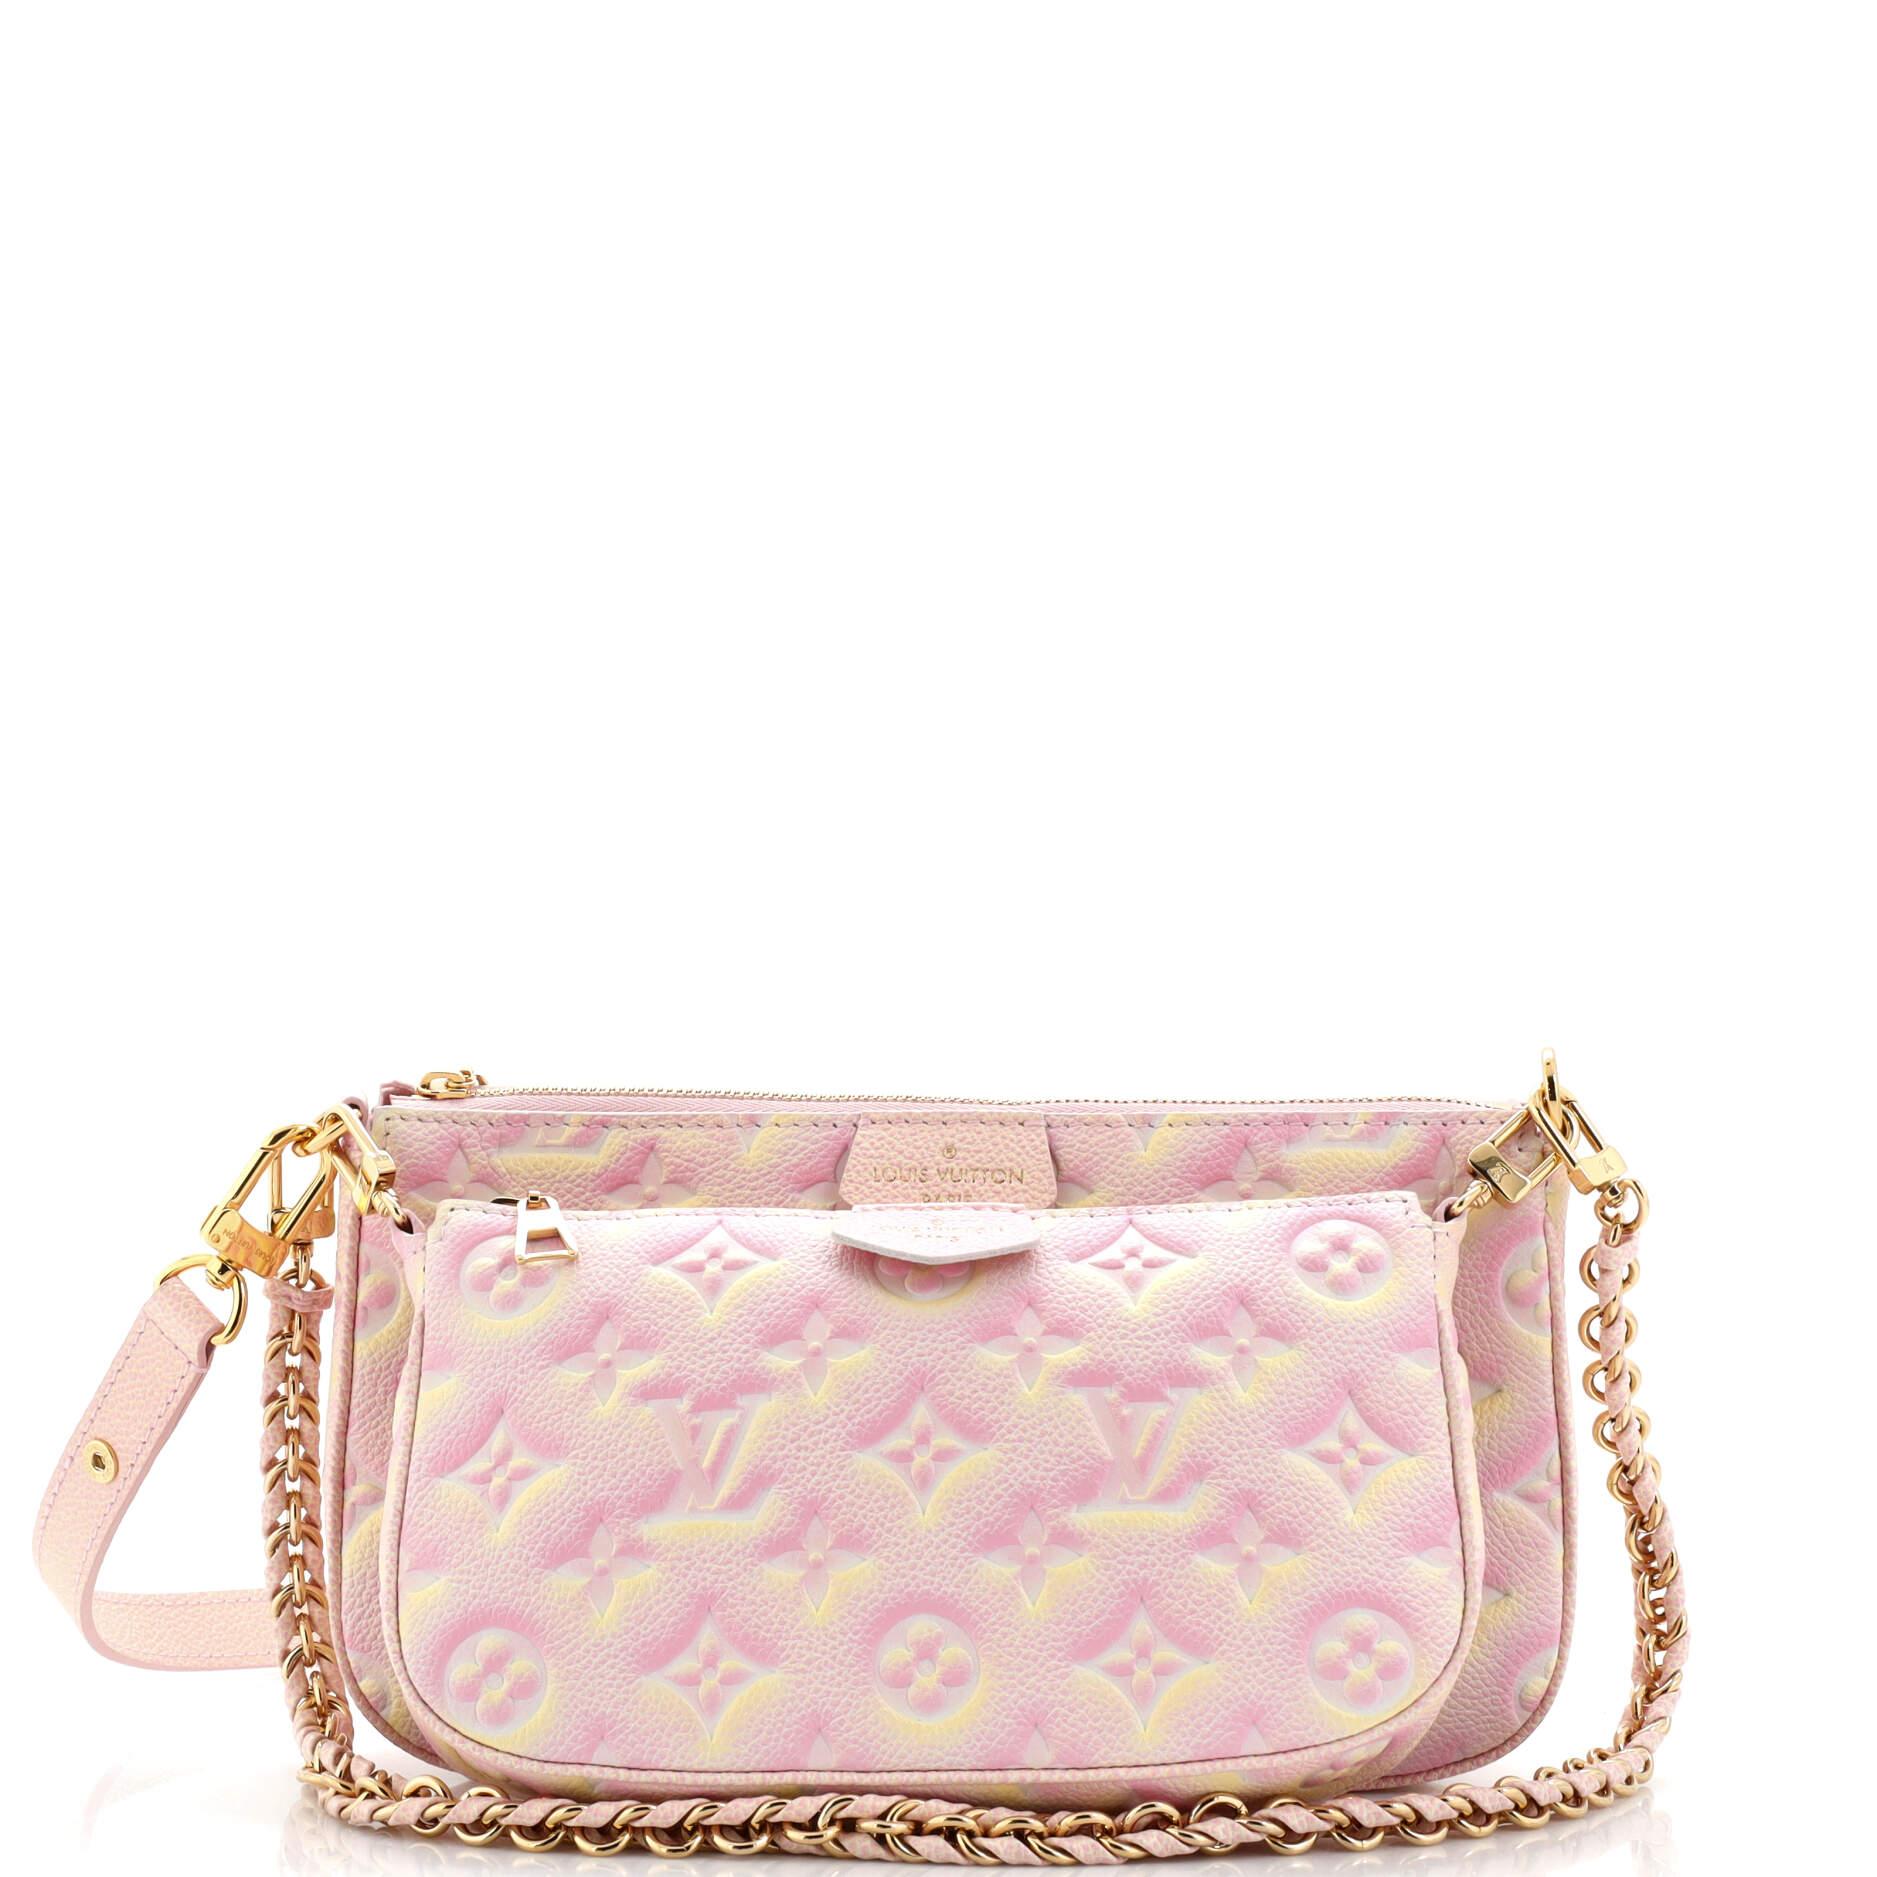 ❌SOLD❌ Louis Vuitton RARE pink crossbody bag with top detachable